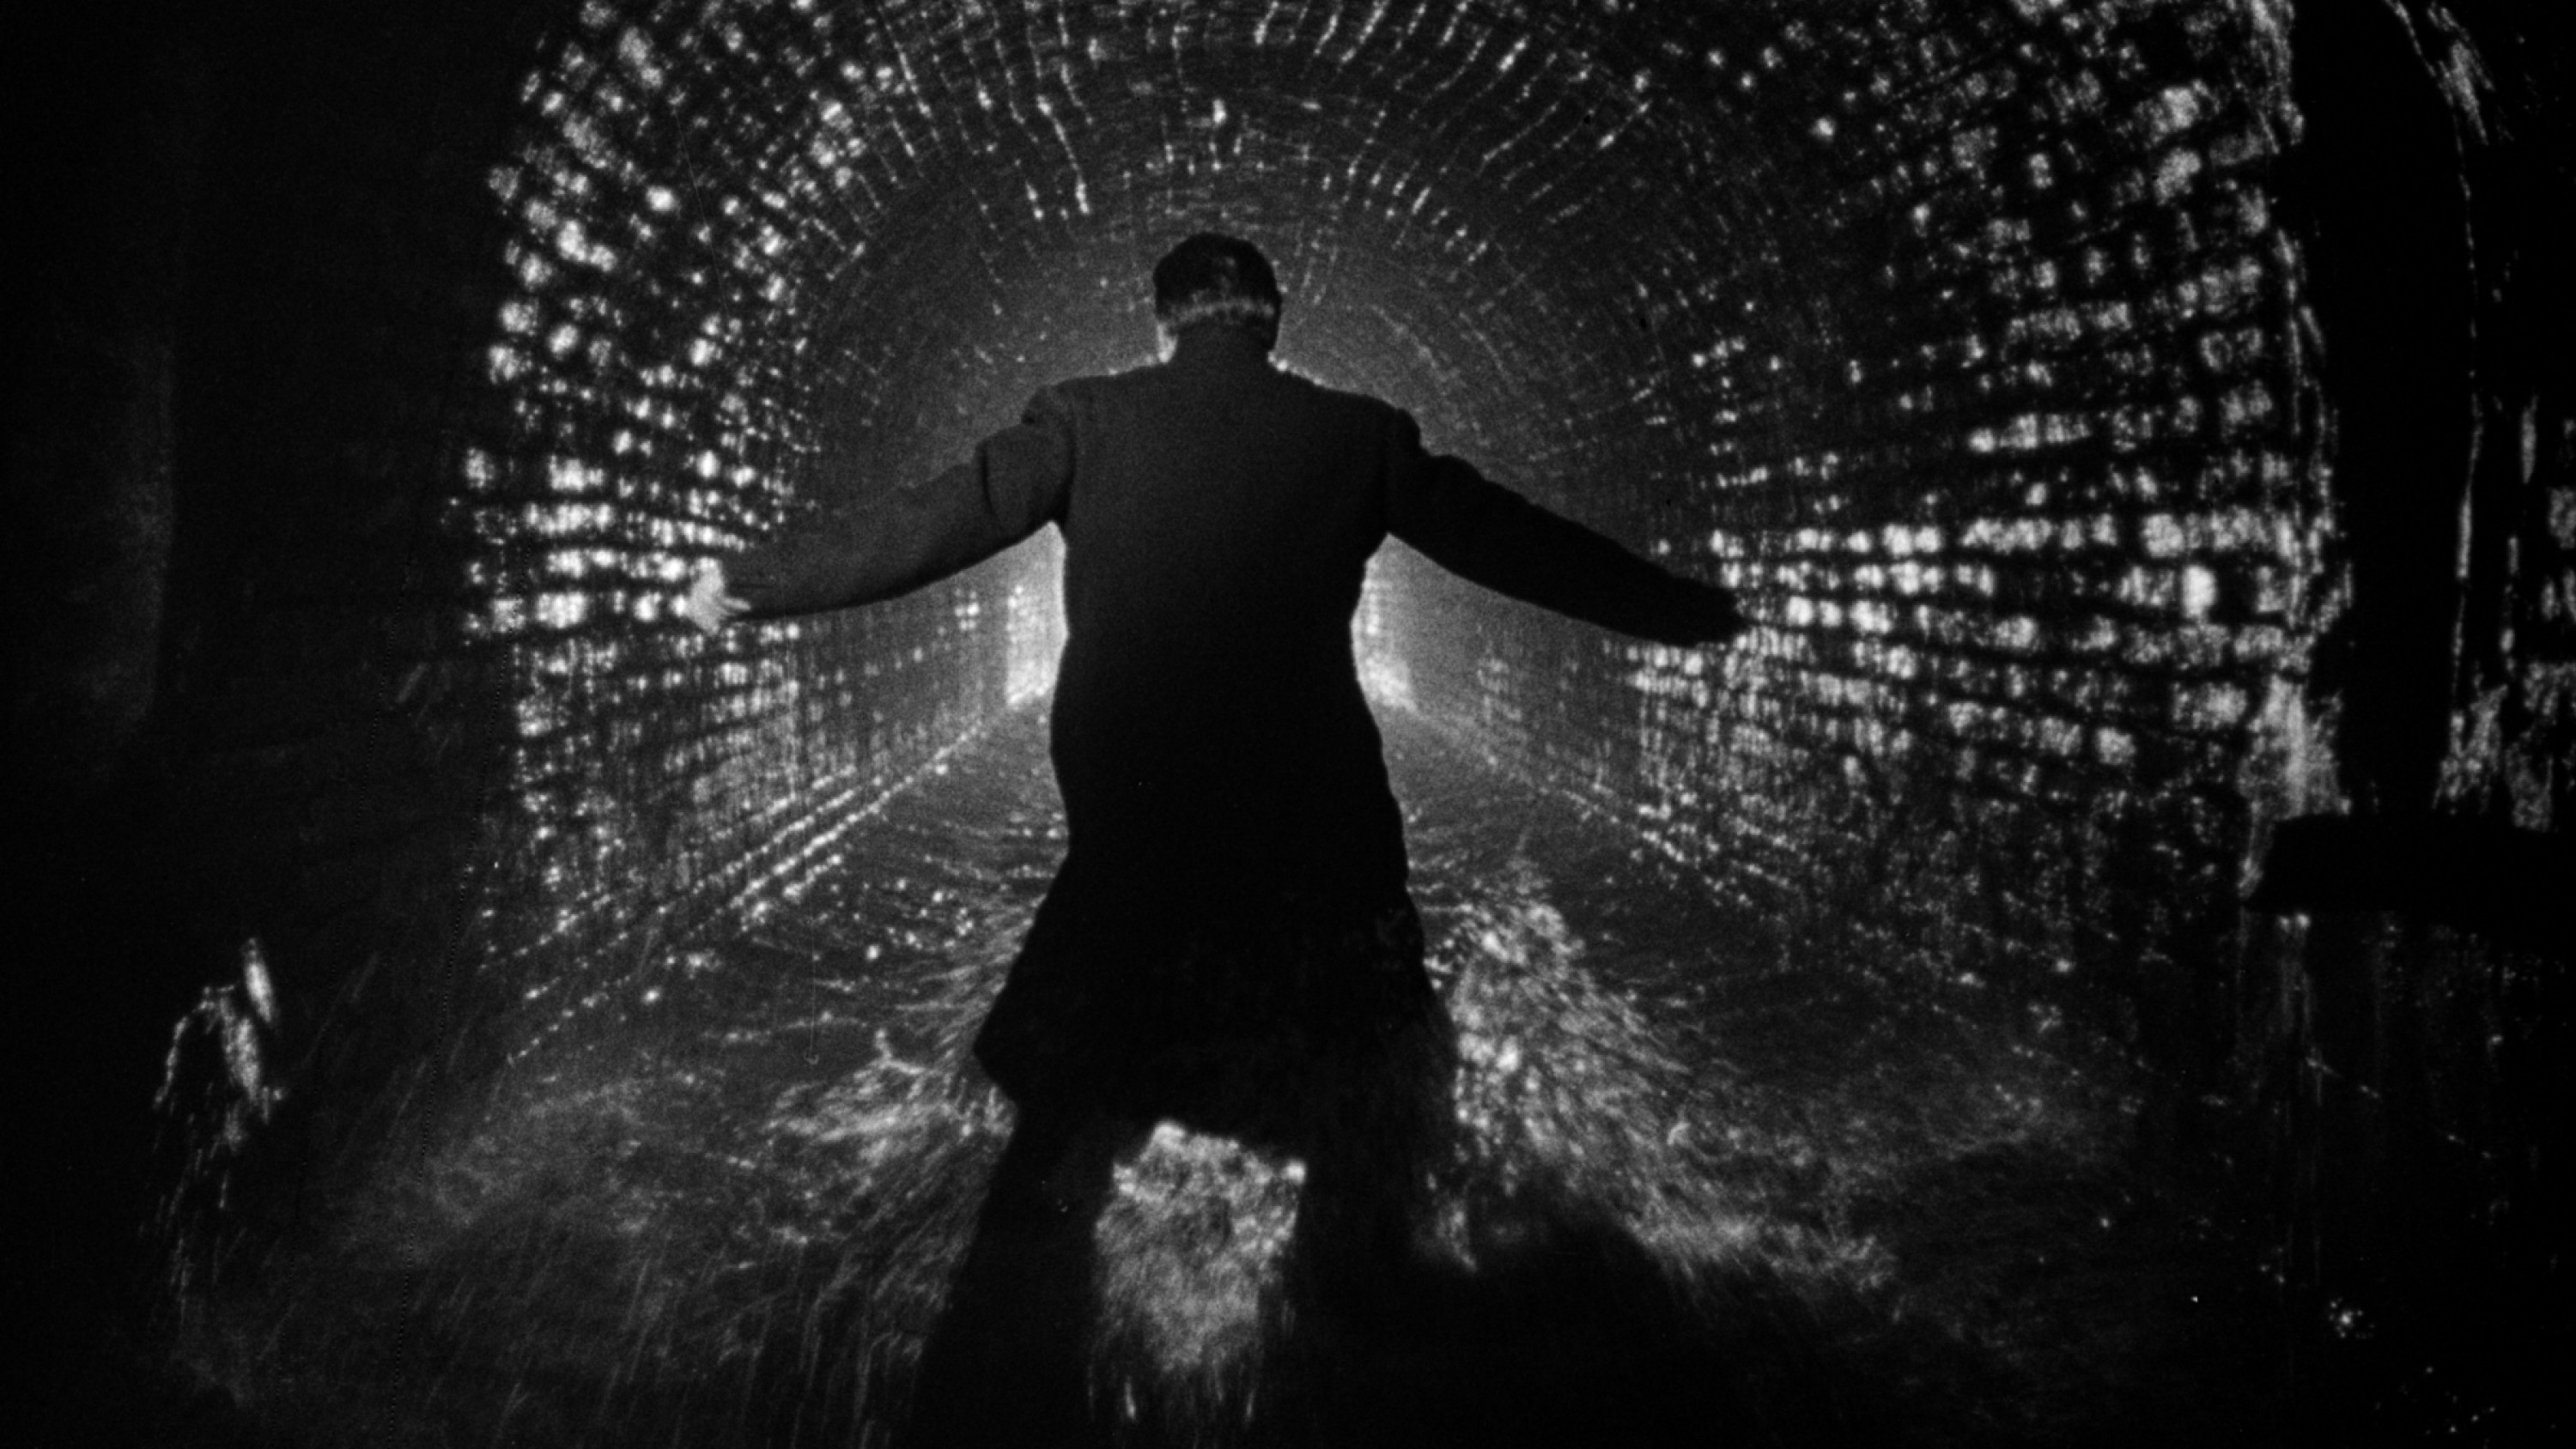 A film guide that looks at The Third Man (1949), exploring its key topics a